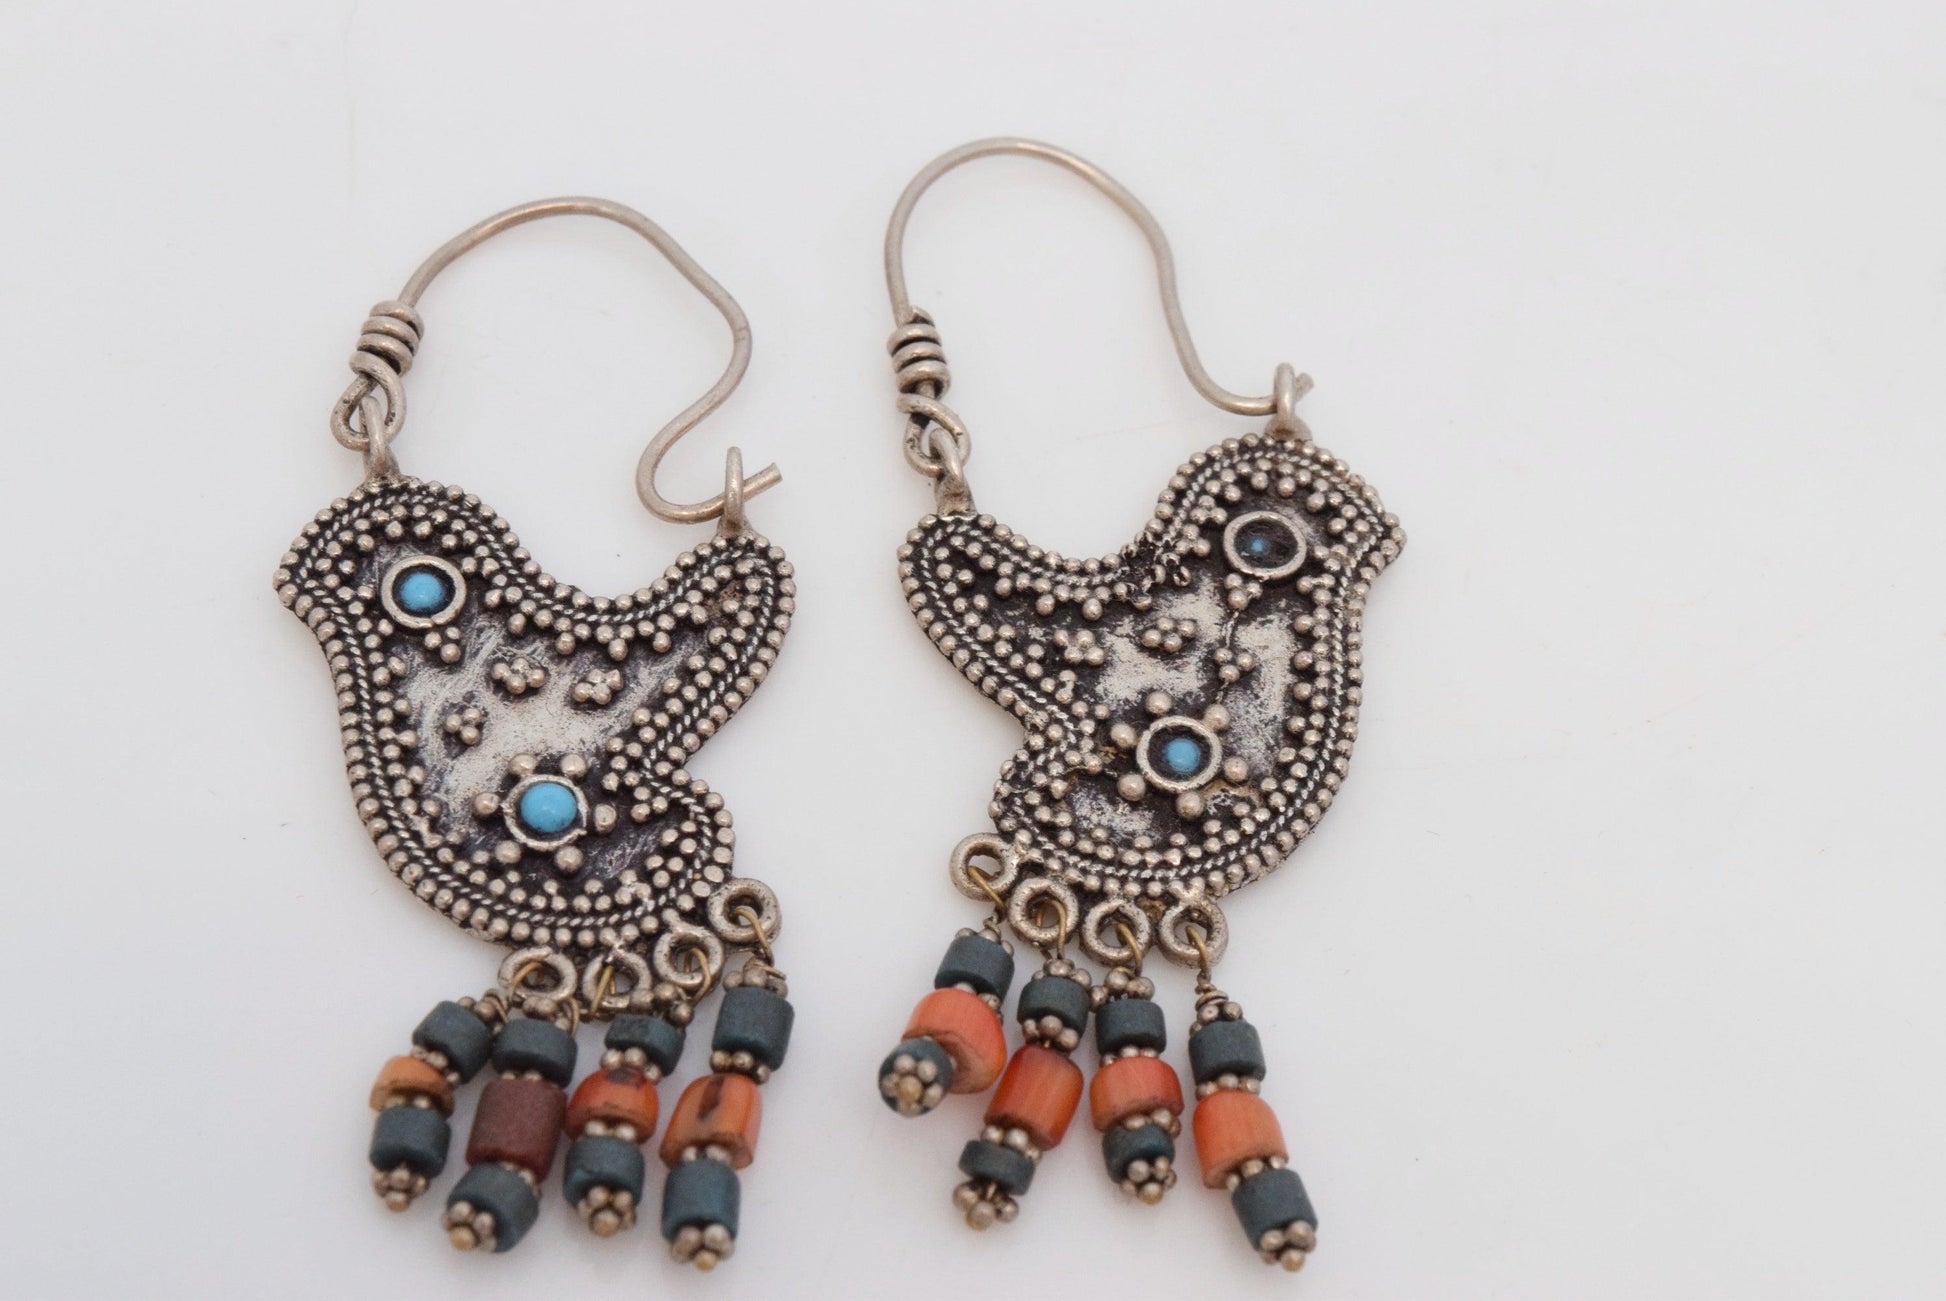 Vintage Afghani Uzbek Style Silver Bird Earrings with turquoise and coral - Anteeka